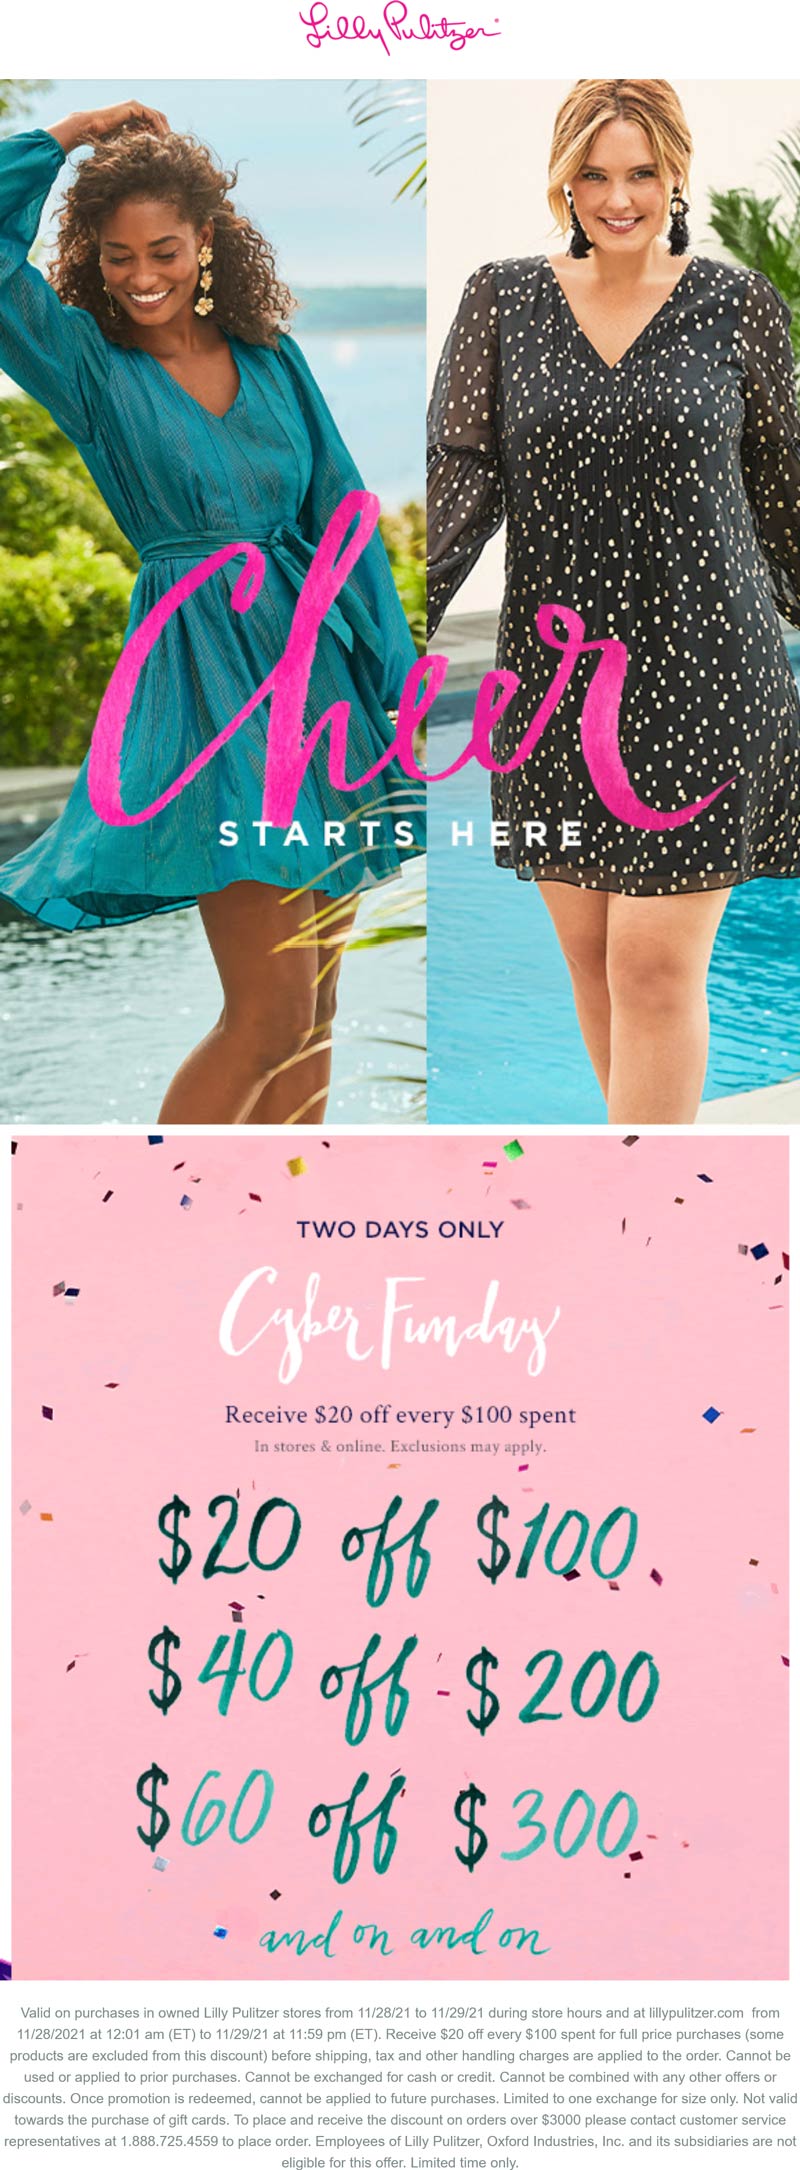 Lilly Pulitzer stores Coupon  $20 off every $100 at Lilly Pulitzer, ditto online #lillypulitzer 